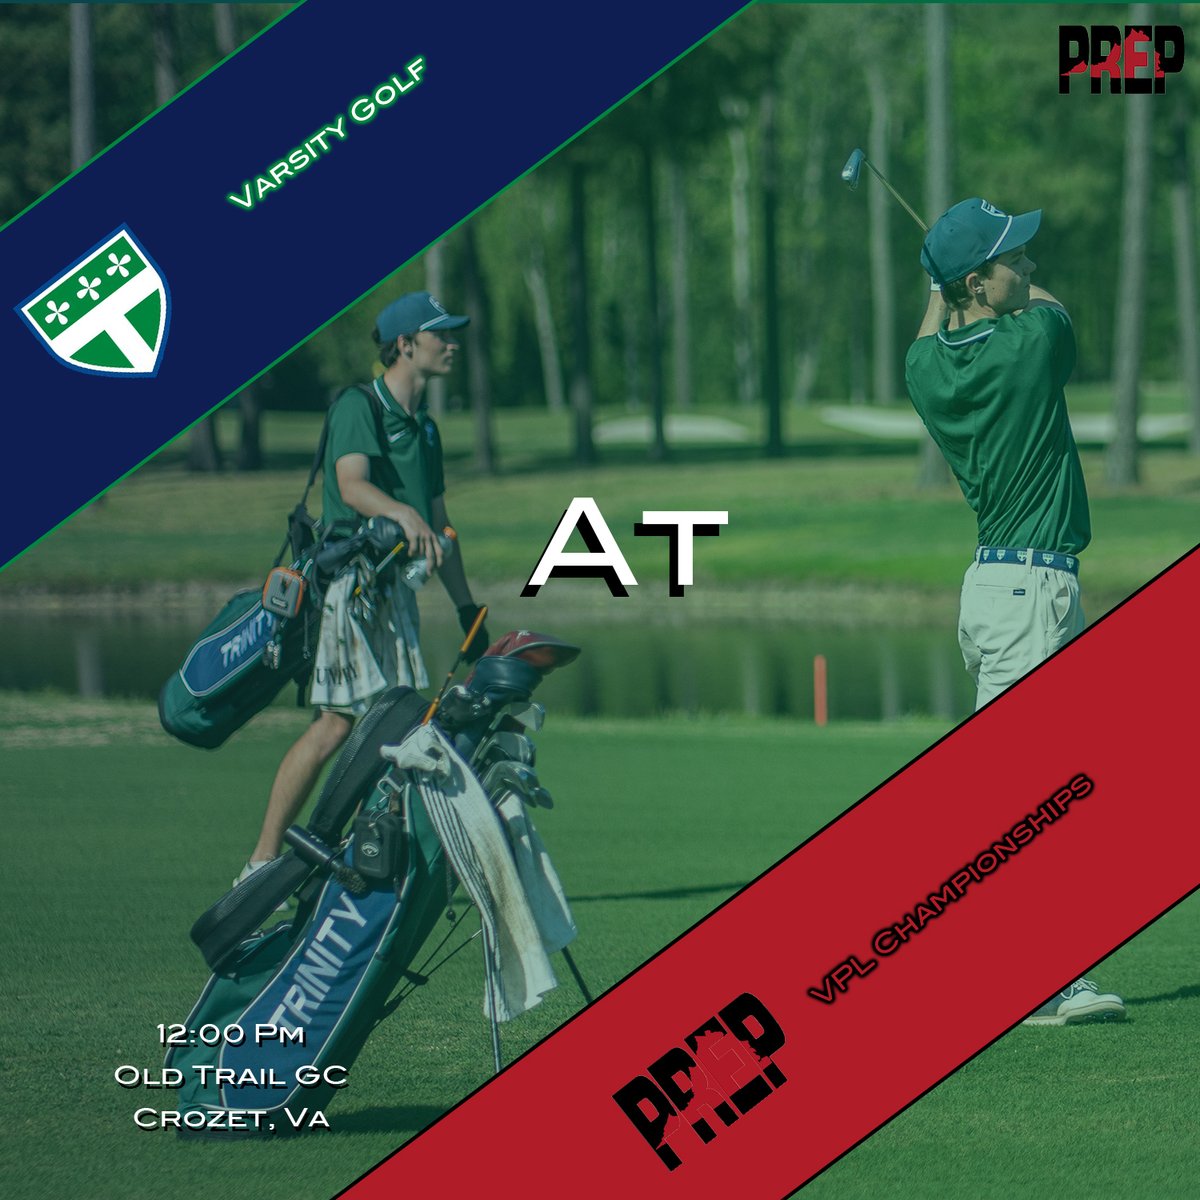 Golf look to reclaim the VPL title as they hit Old Trail GC to take on the league! Let's Go Titans!